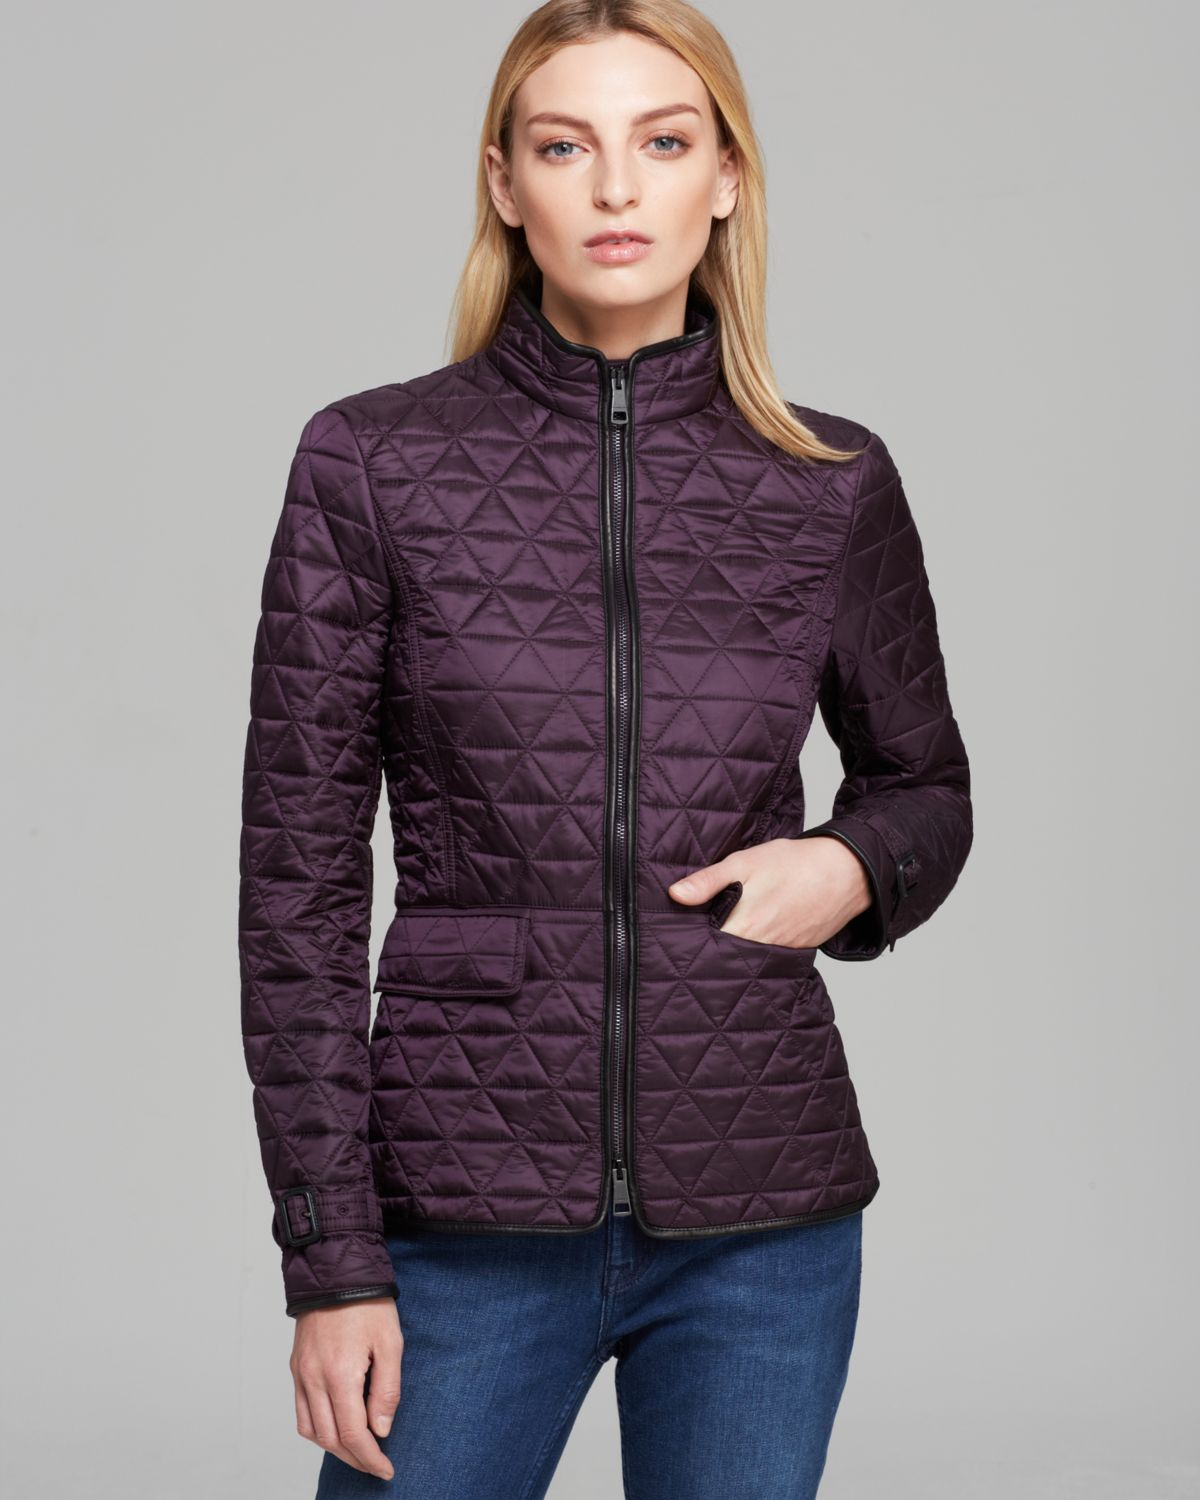 Burberry Brit Laycroft Quilted Jacket in Purple - Lyst